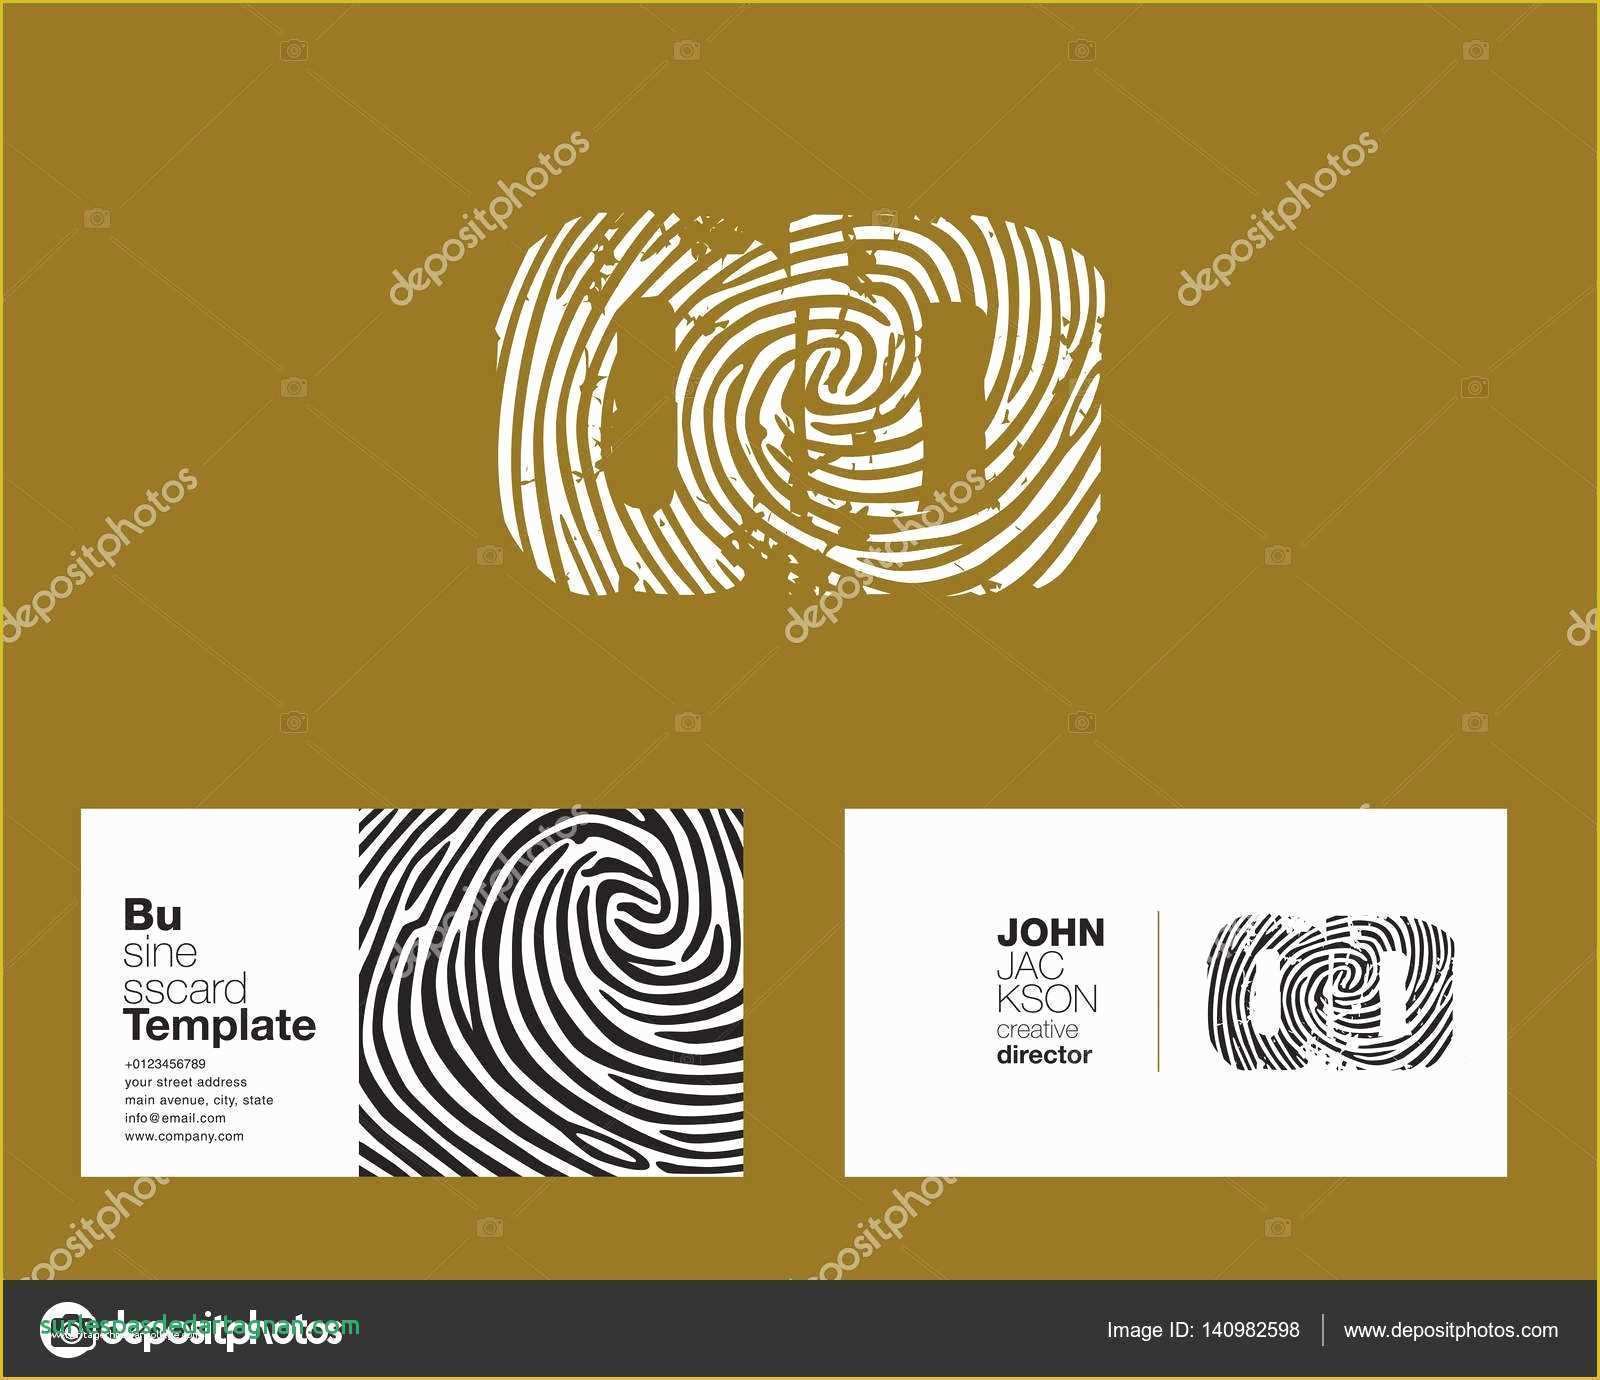 Business Card Template Illustrator Free Of 34 Beautiful Business Card Template Illustrator